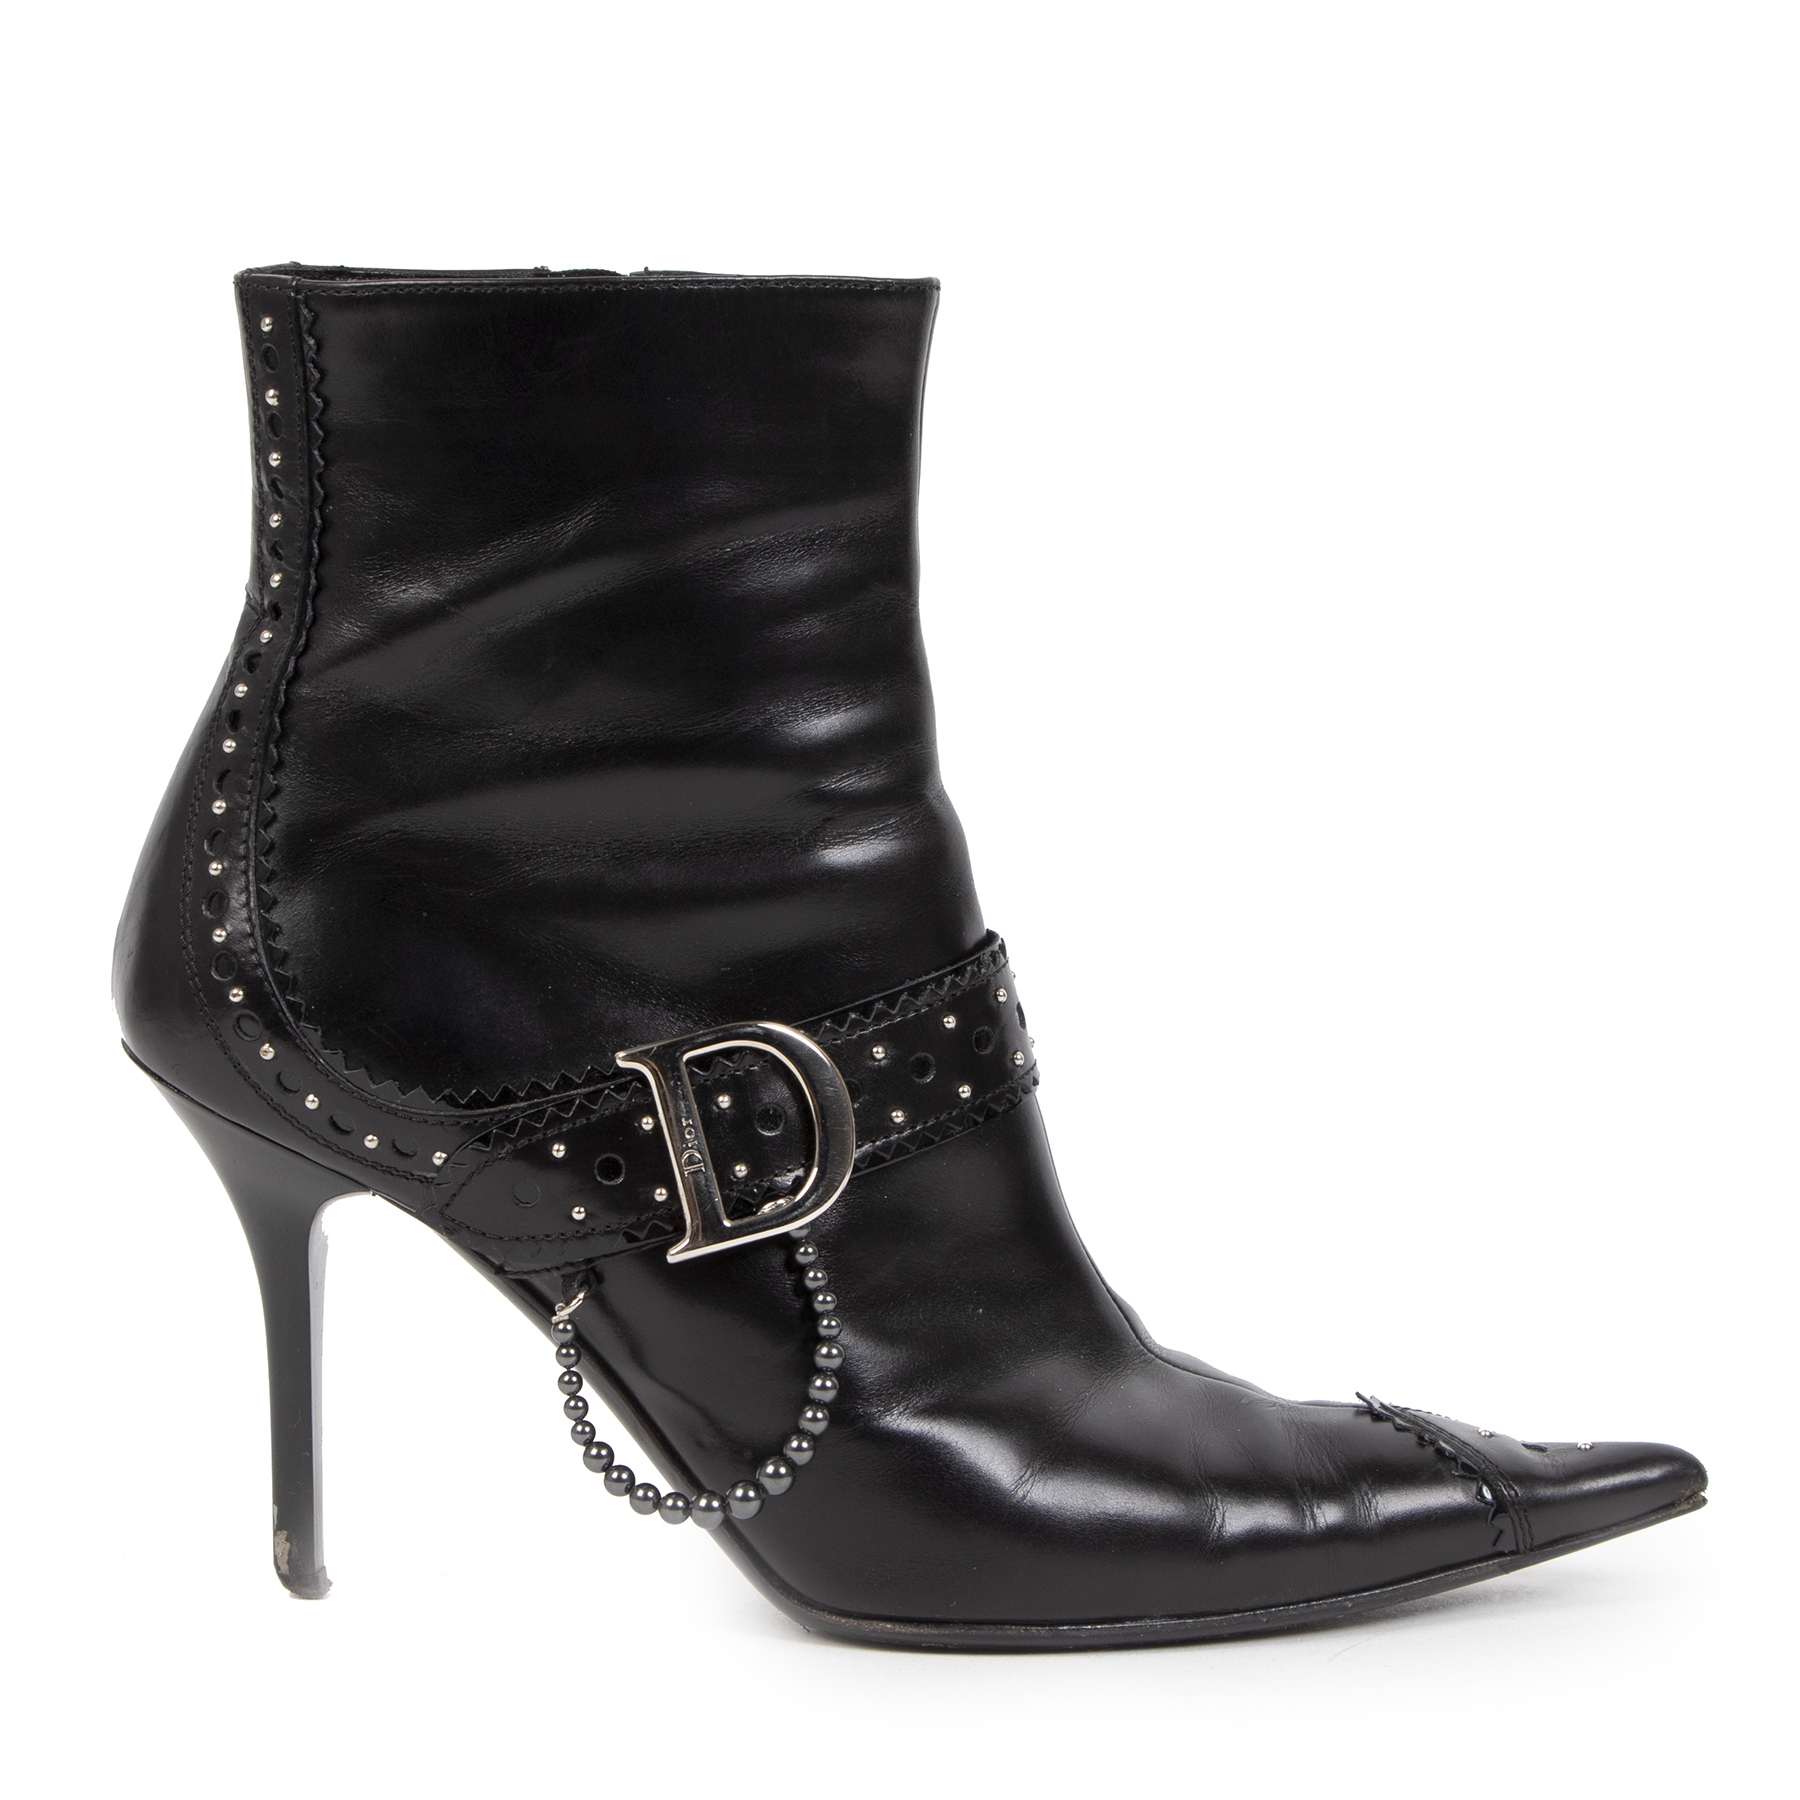 Leather ankle boots Dior Black size 37.5 EU in Leather - 25104677